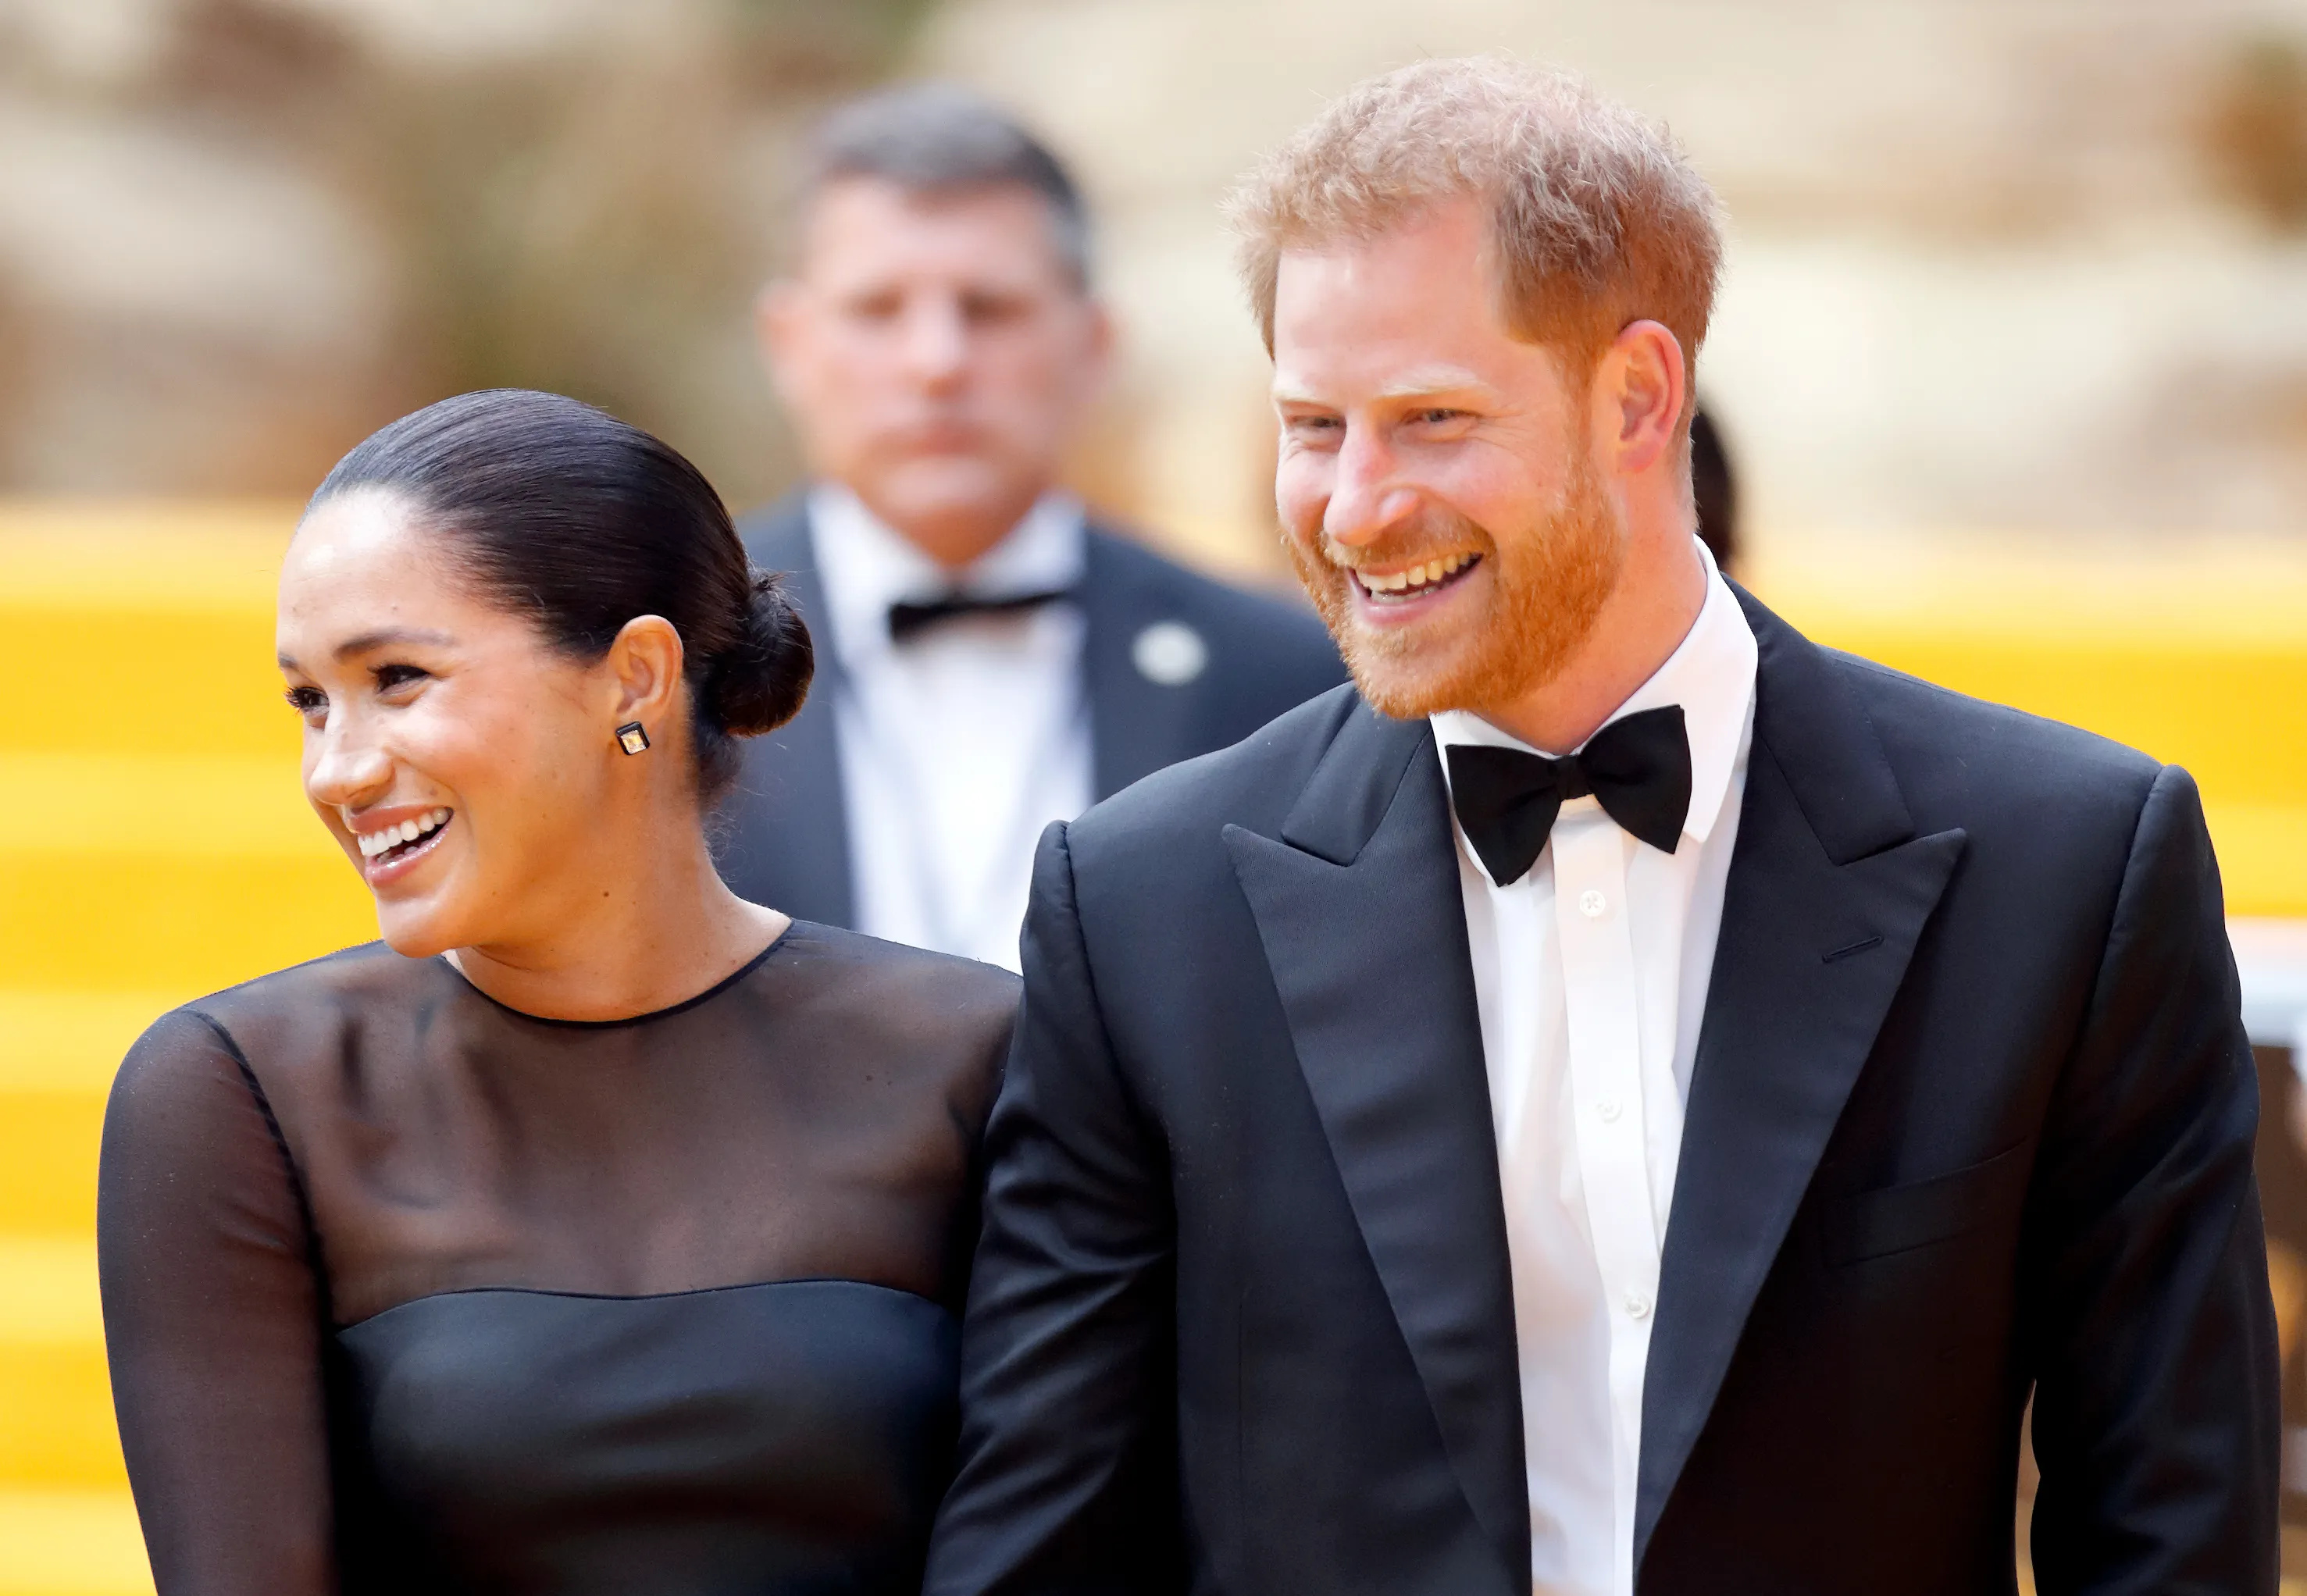 HD wallpaper, Architectural Digest, 2960X2050 Hd Desktop, Elton John, Desktop Hd Prince Harry And Meghan Markle Background Photo, French Vacation Home